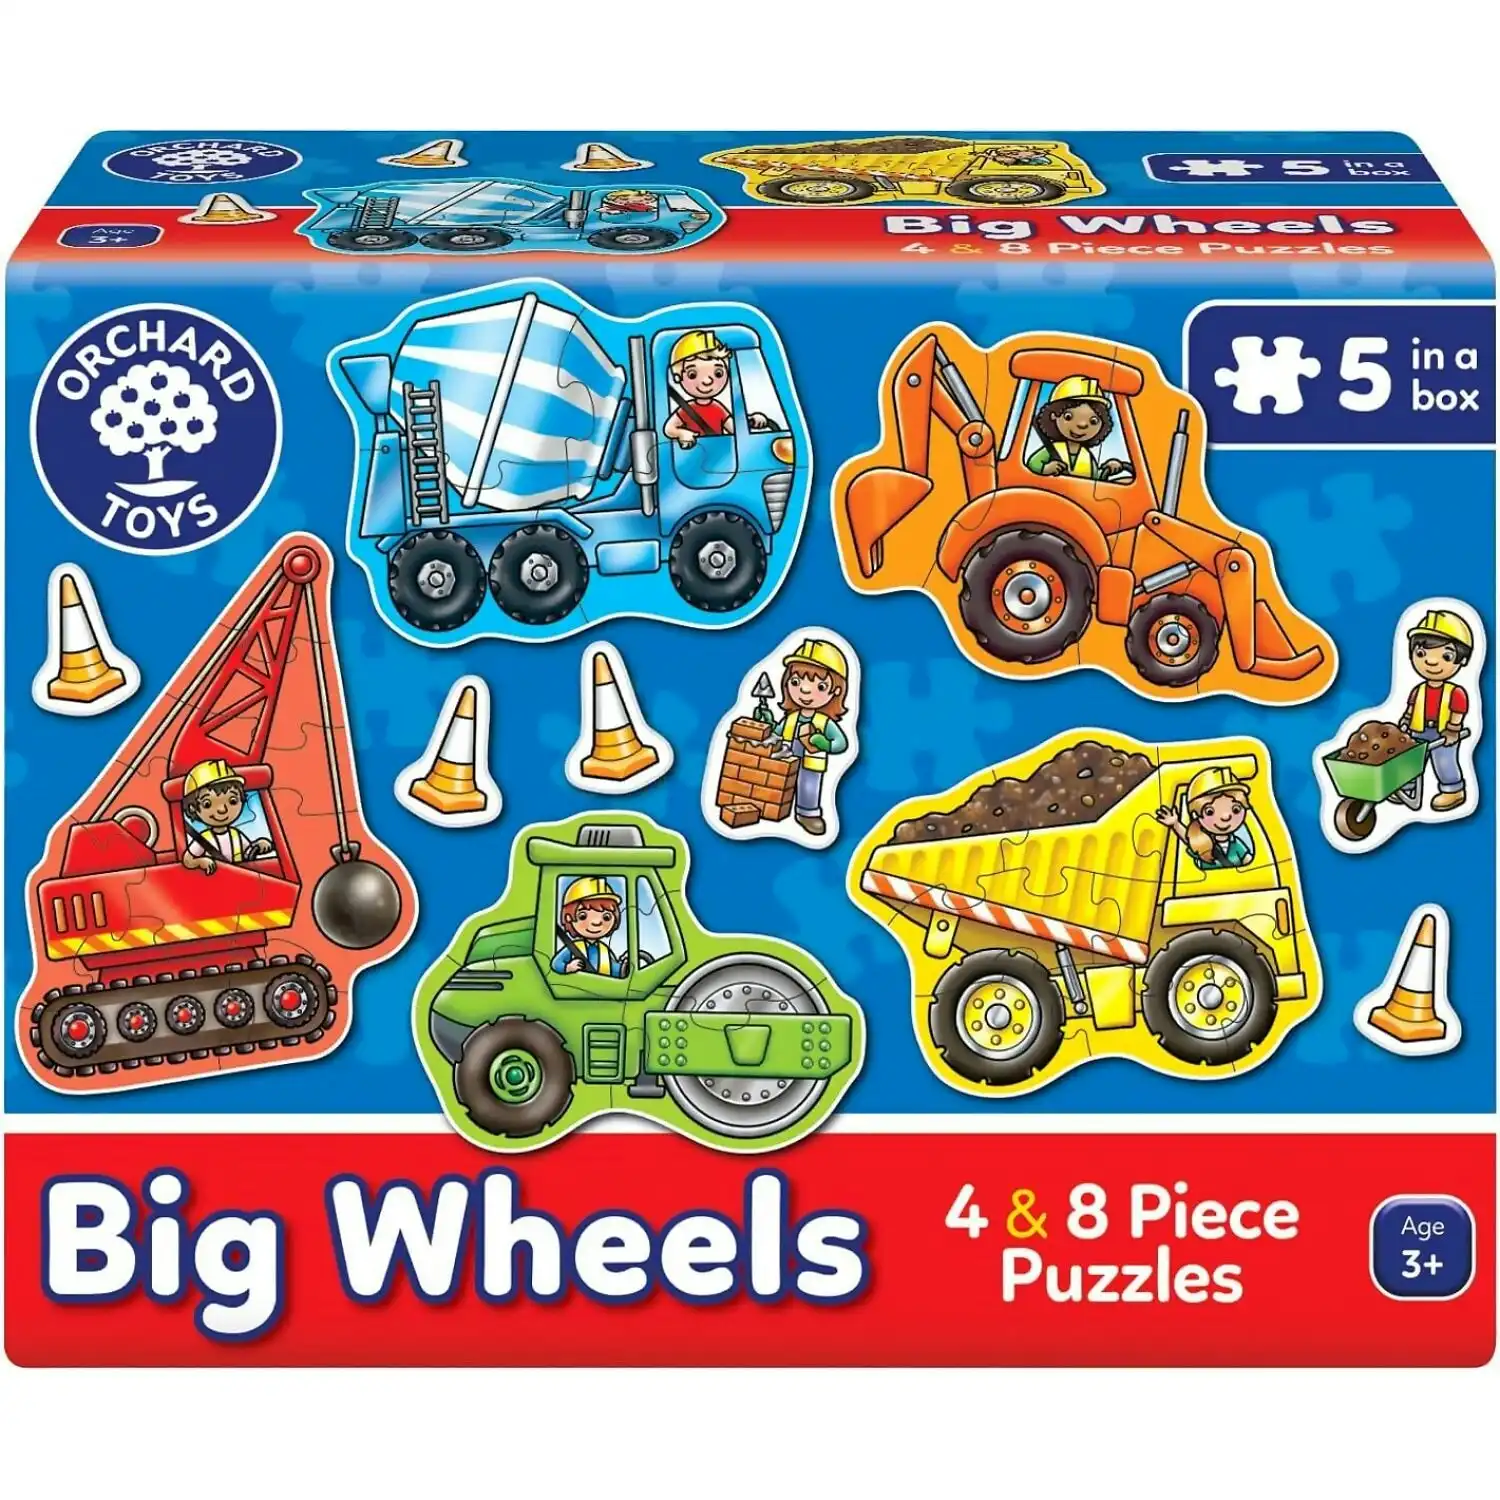 Orchard Toys - Big Wheels Jigsaw Puzzle 4 X 8 Pieces